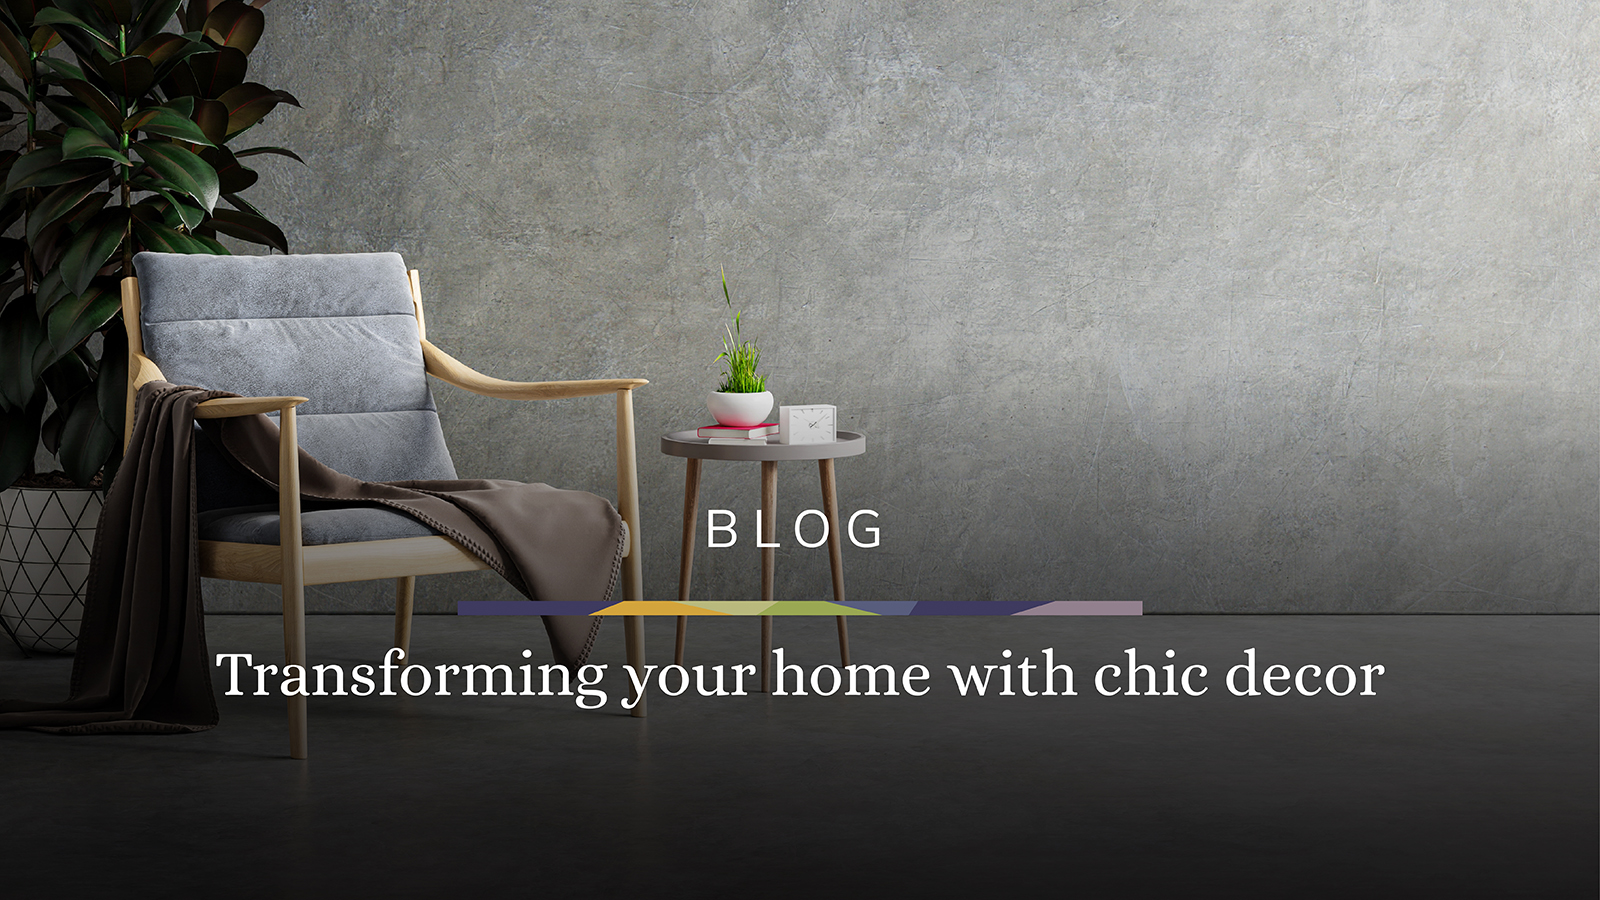 Transforming your home with chic decor